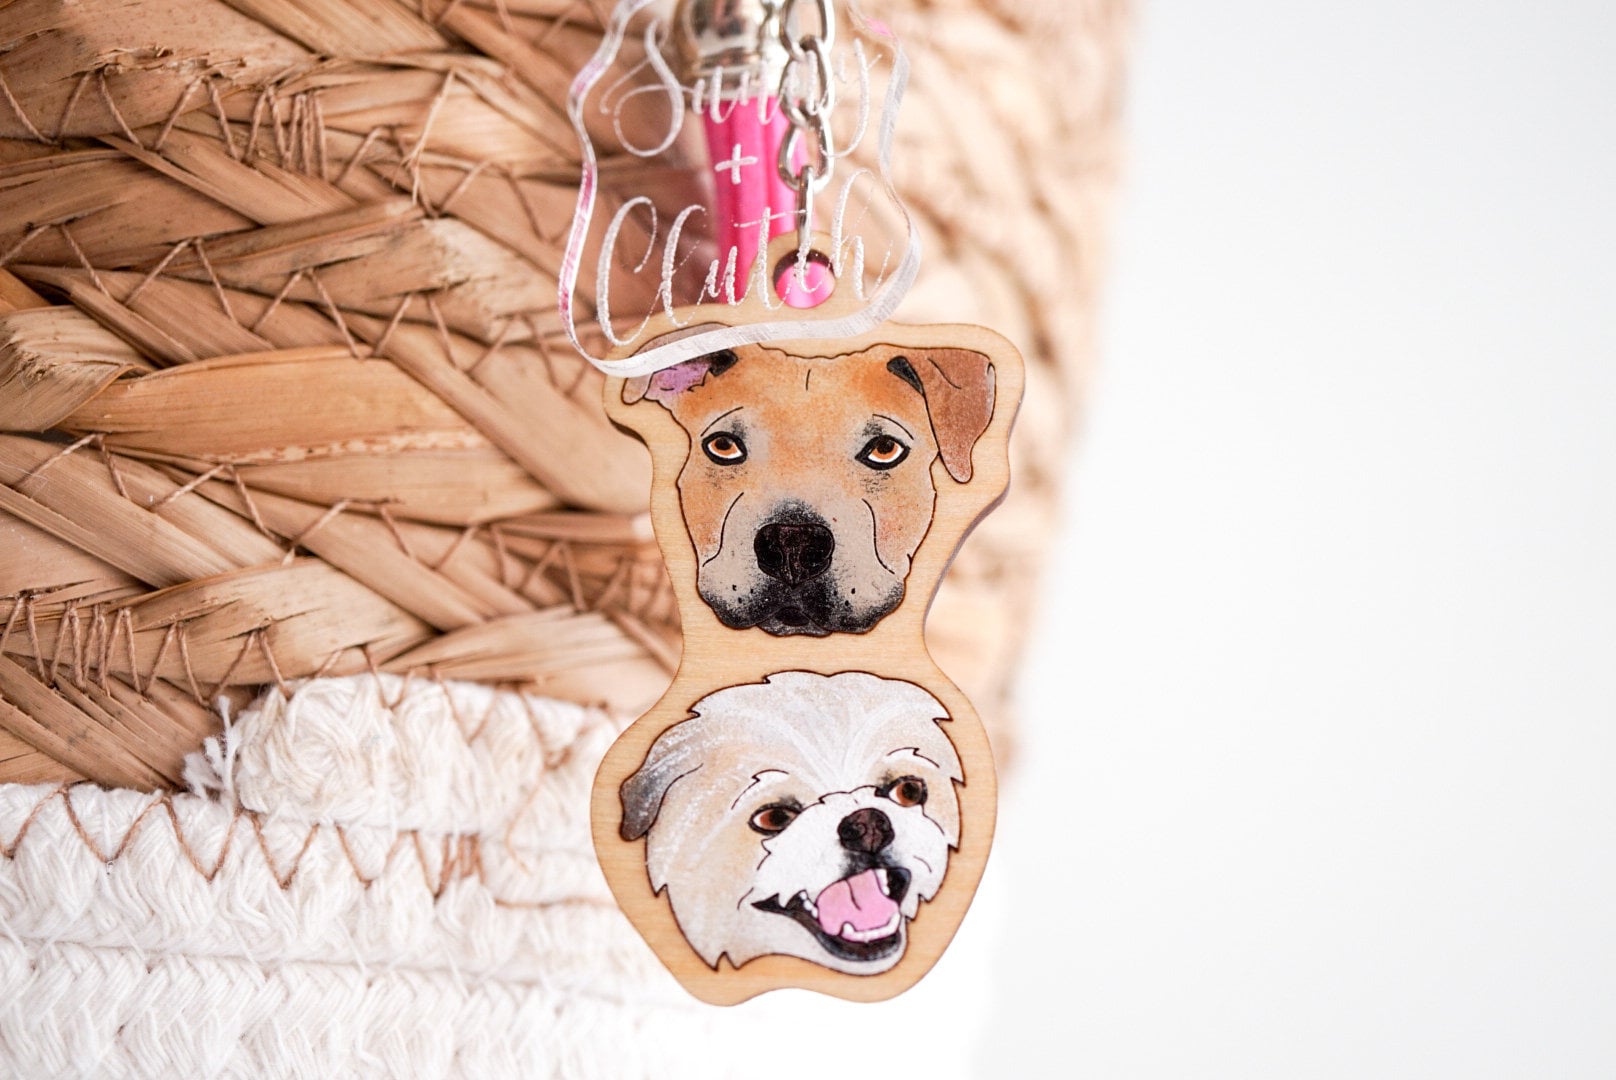 Swivel Clasp Easy Dog Tag Changer Dog Collar Id Tag Clip or Lobster Clasp  or Split Ring an Easy Way to Connect Your Pet Id Tag Add Ons 